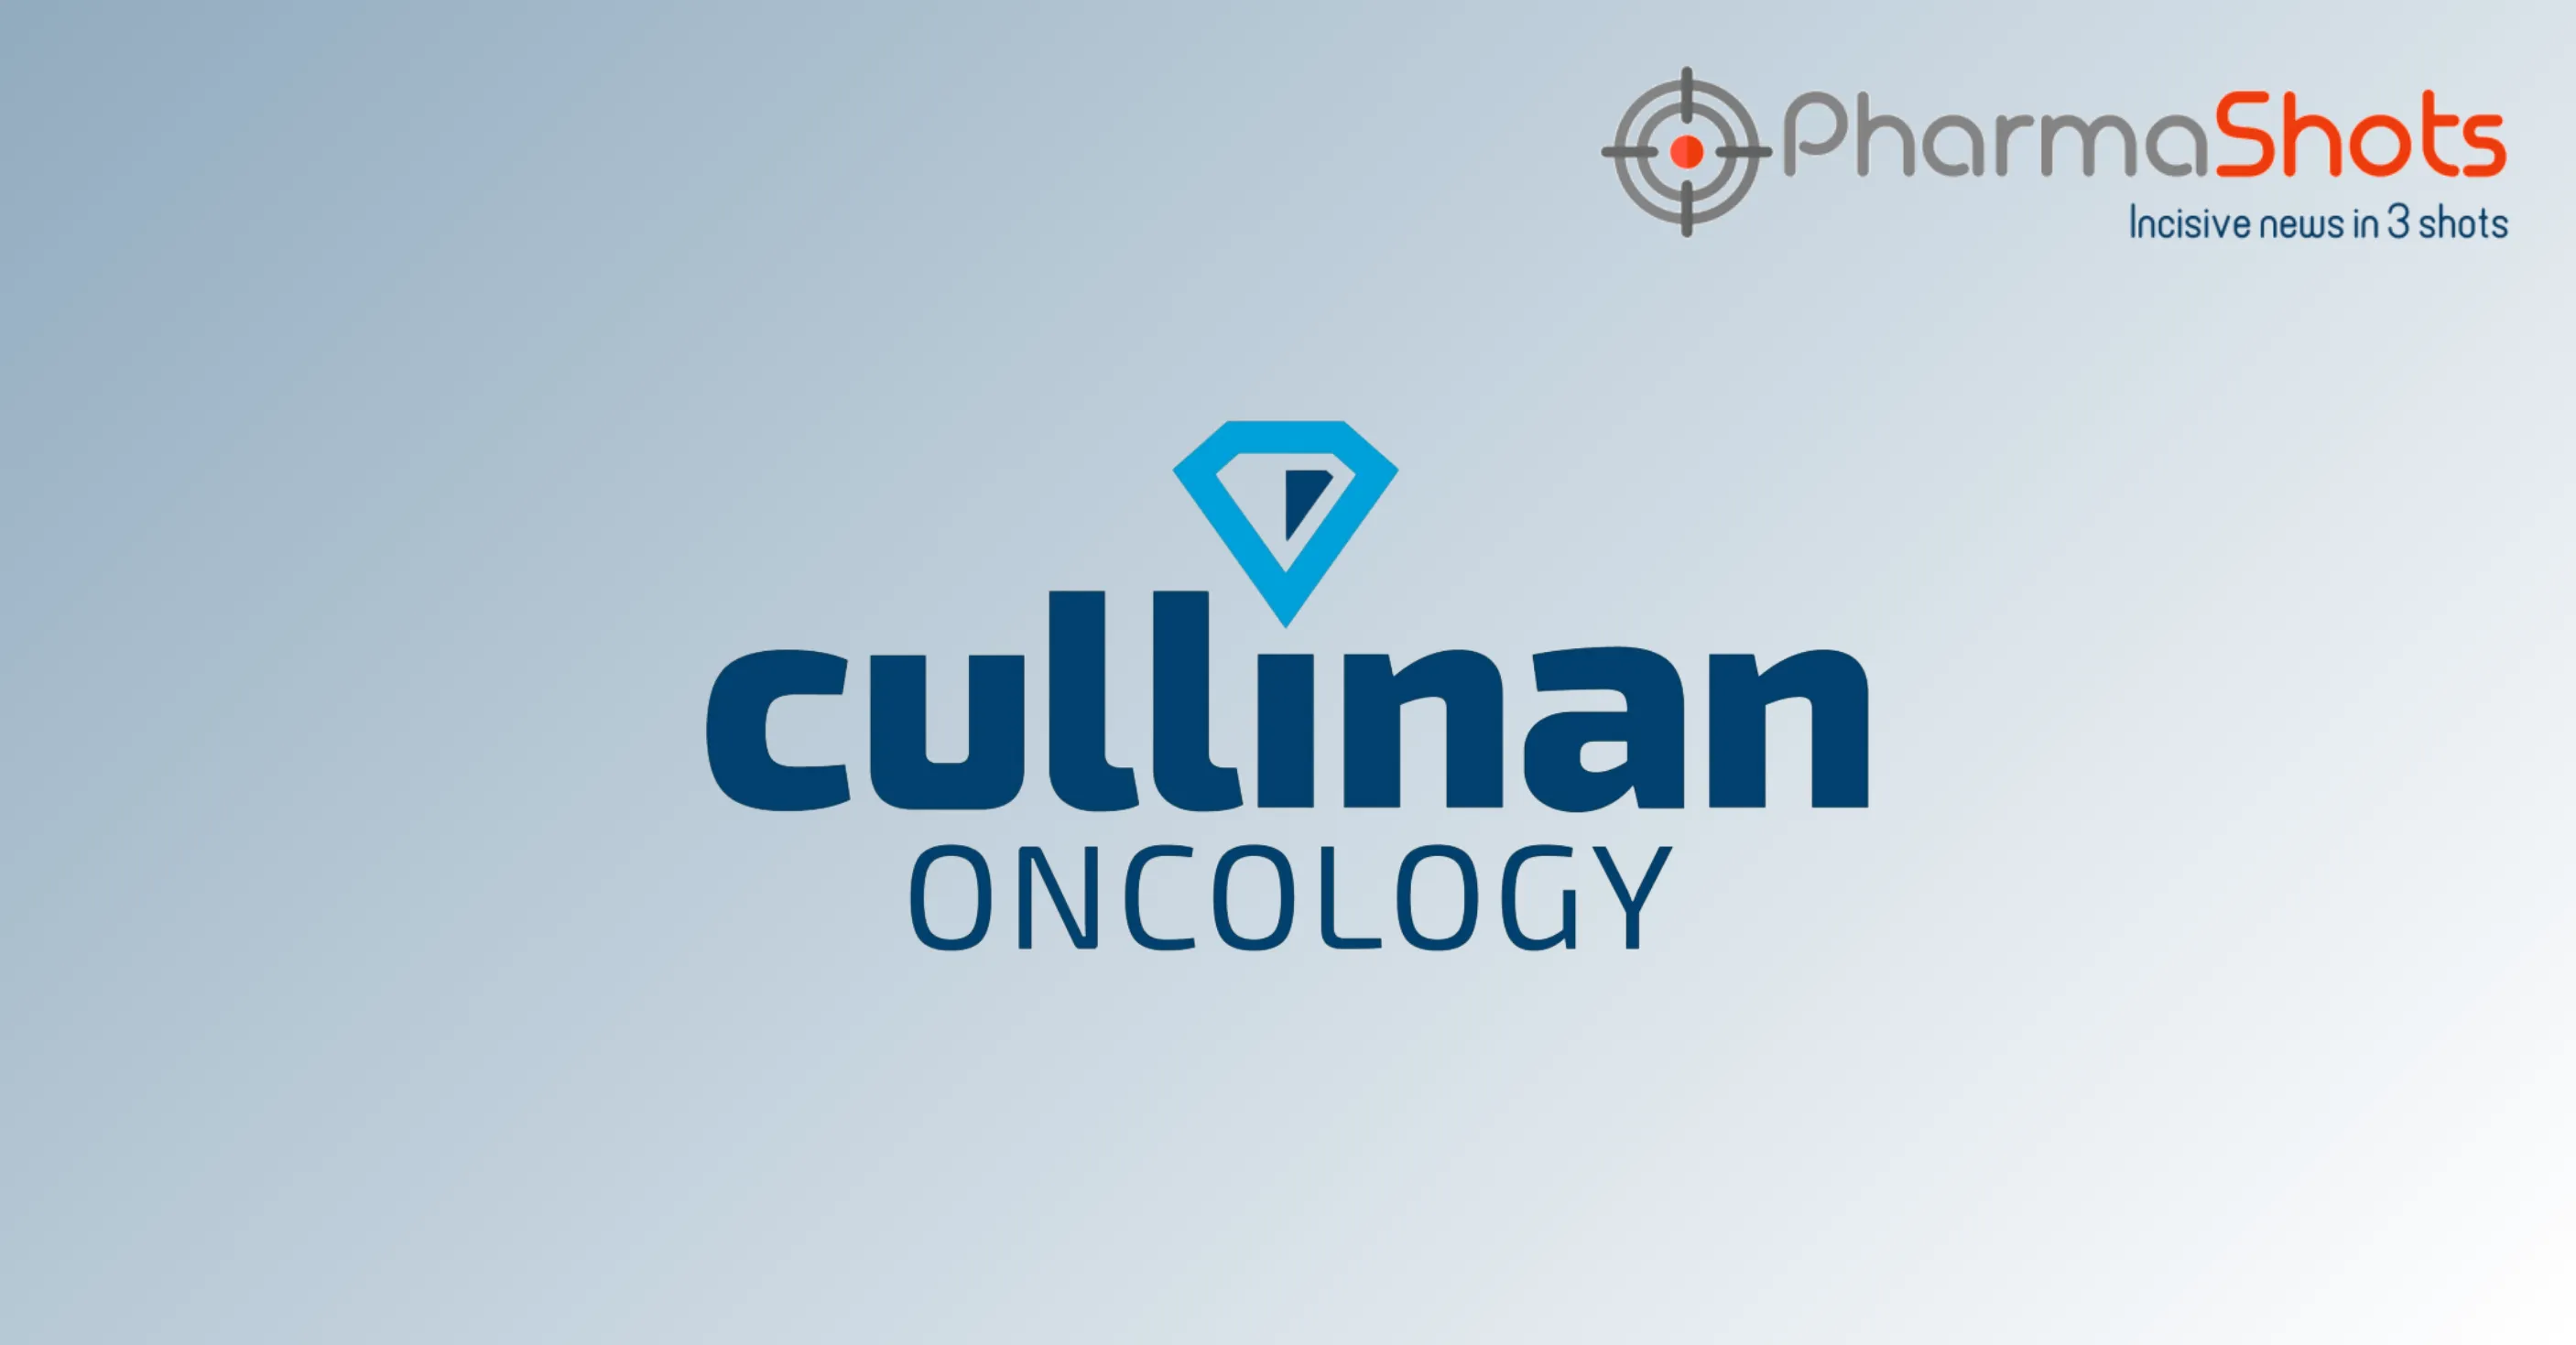 The US FDA Clears Cullinan Oncology’s IND Application of CLN-619 for Treating R/R Multiple Myeloma